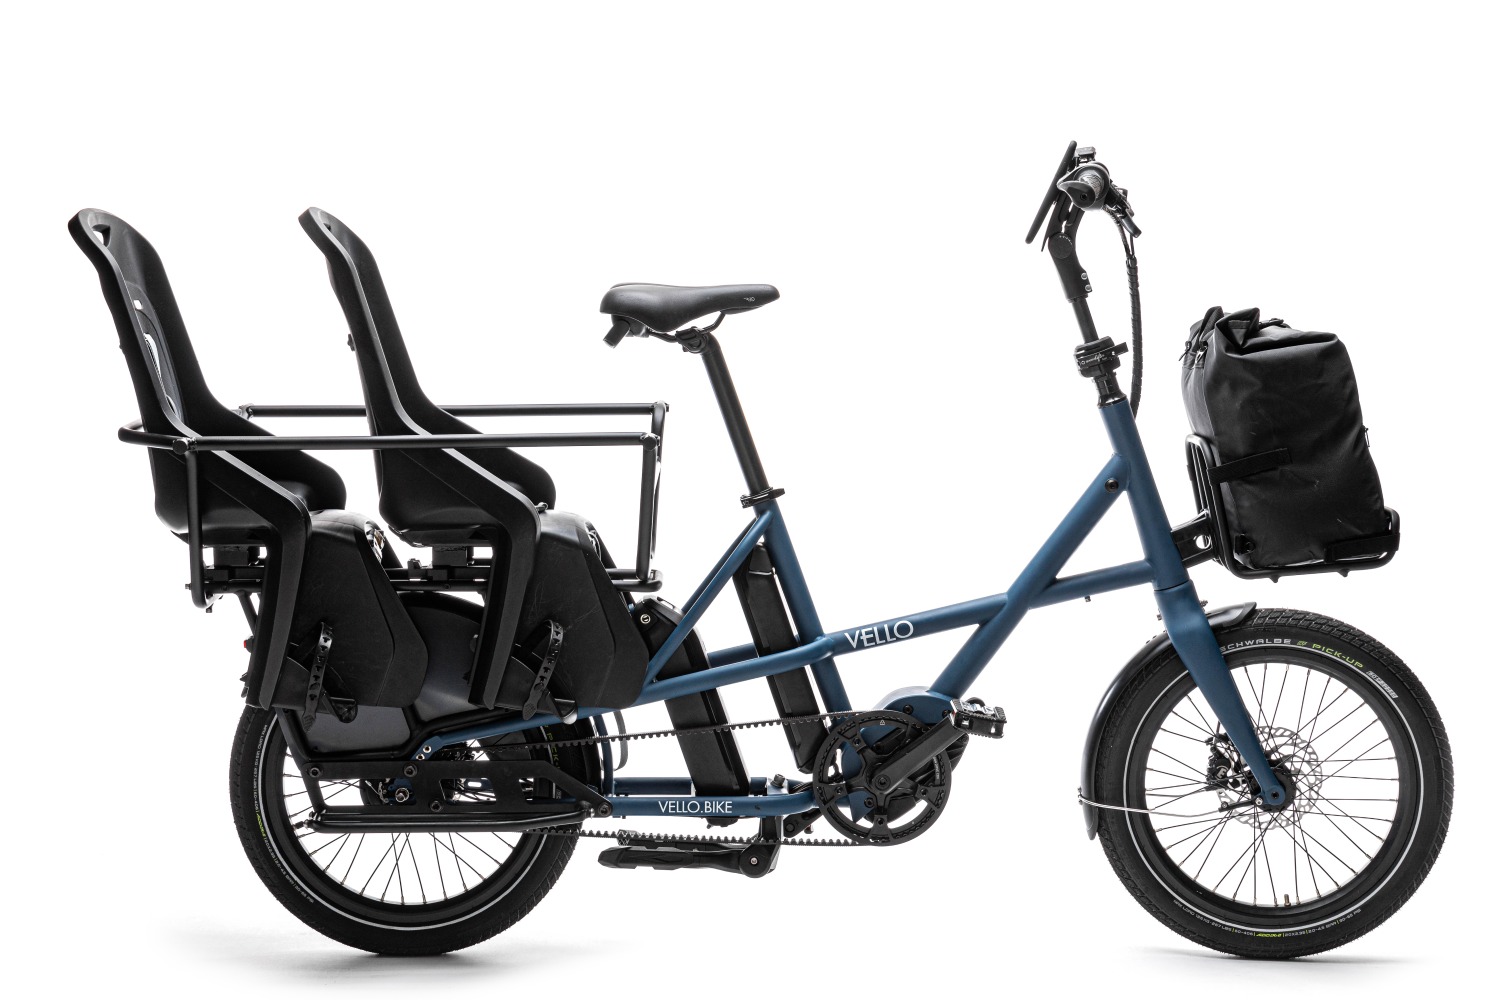 VELLO SUB Longtail cargo bike with two rear seats for children fitted